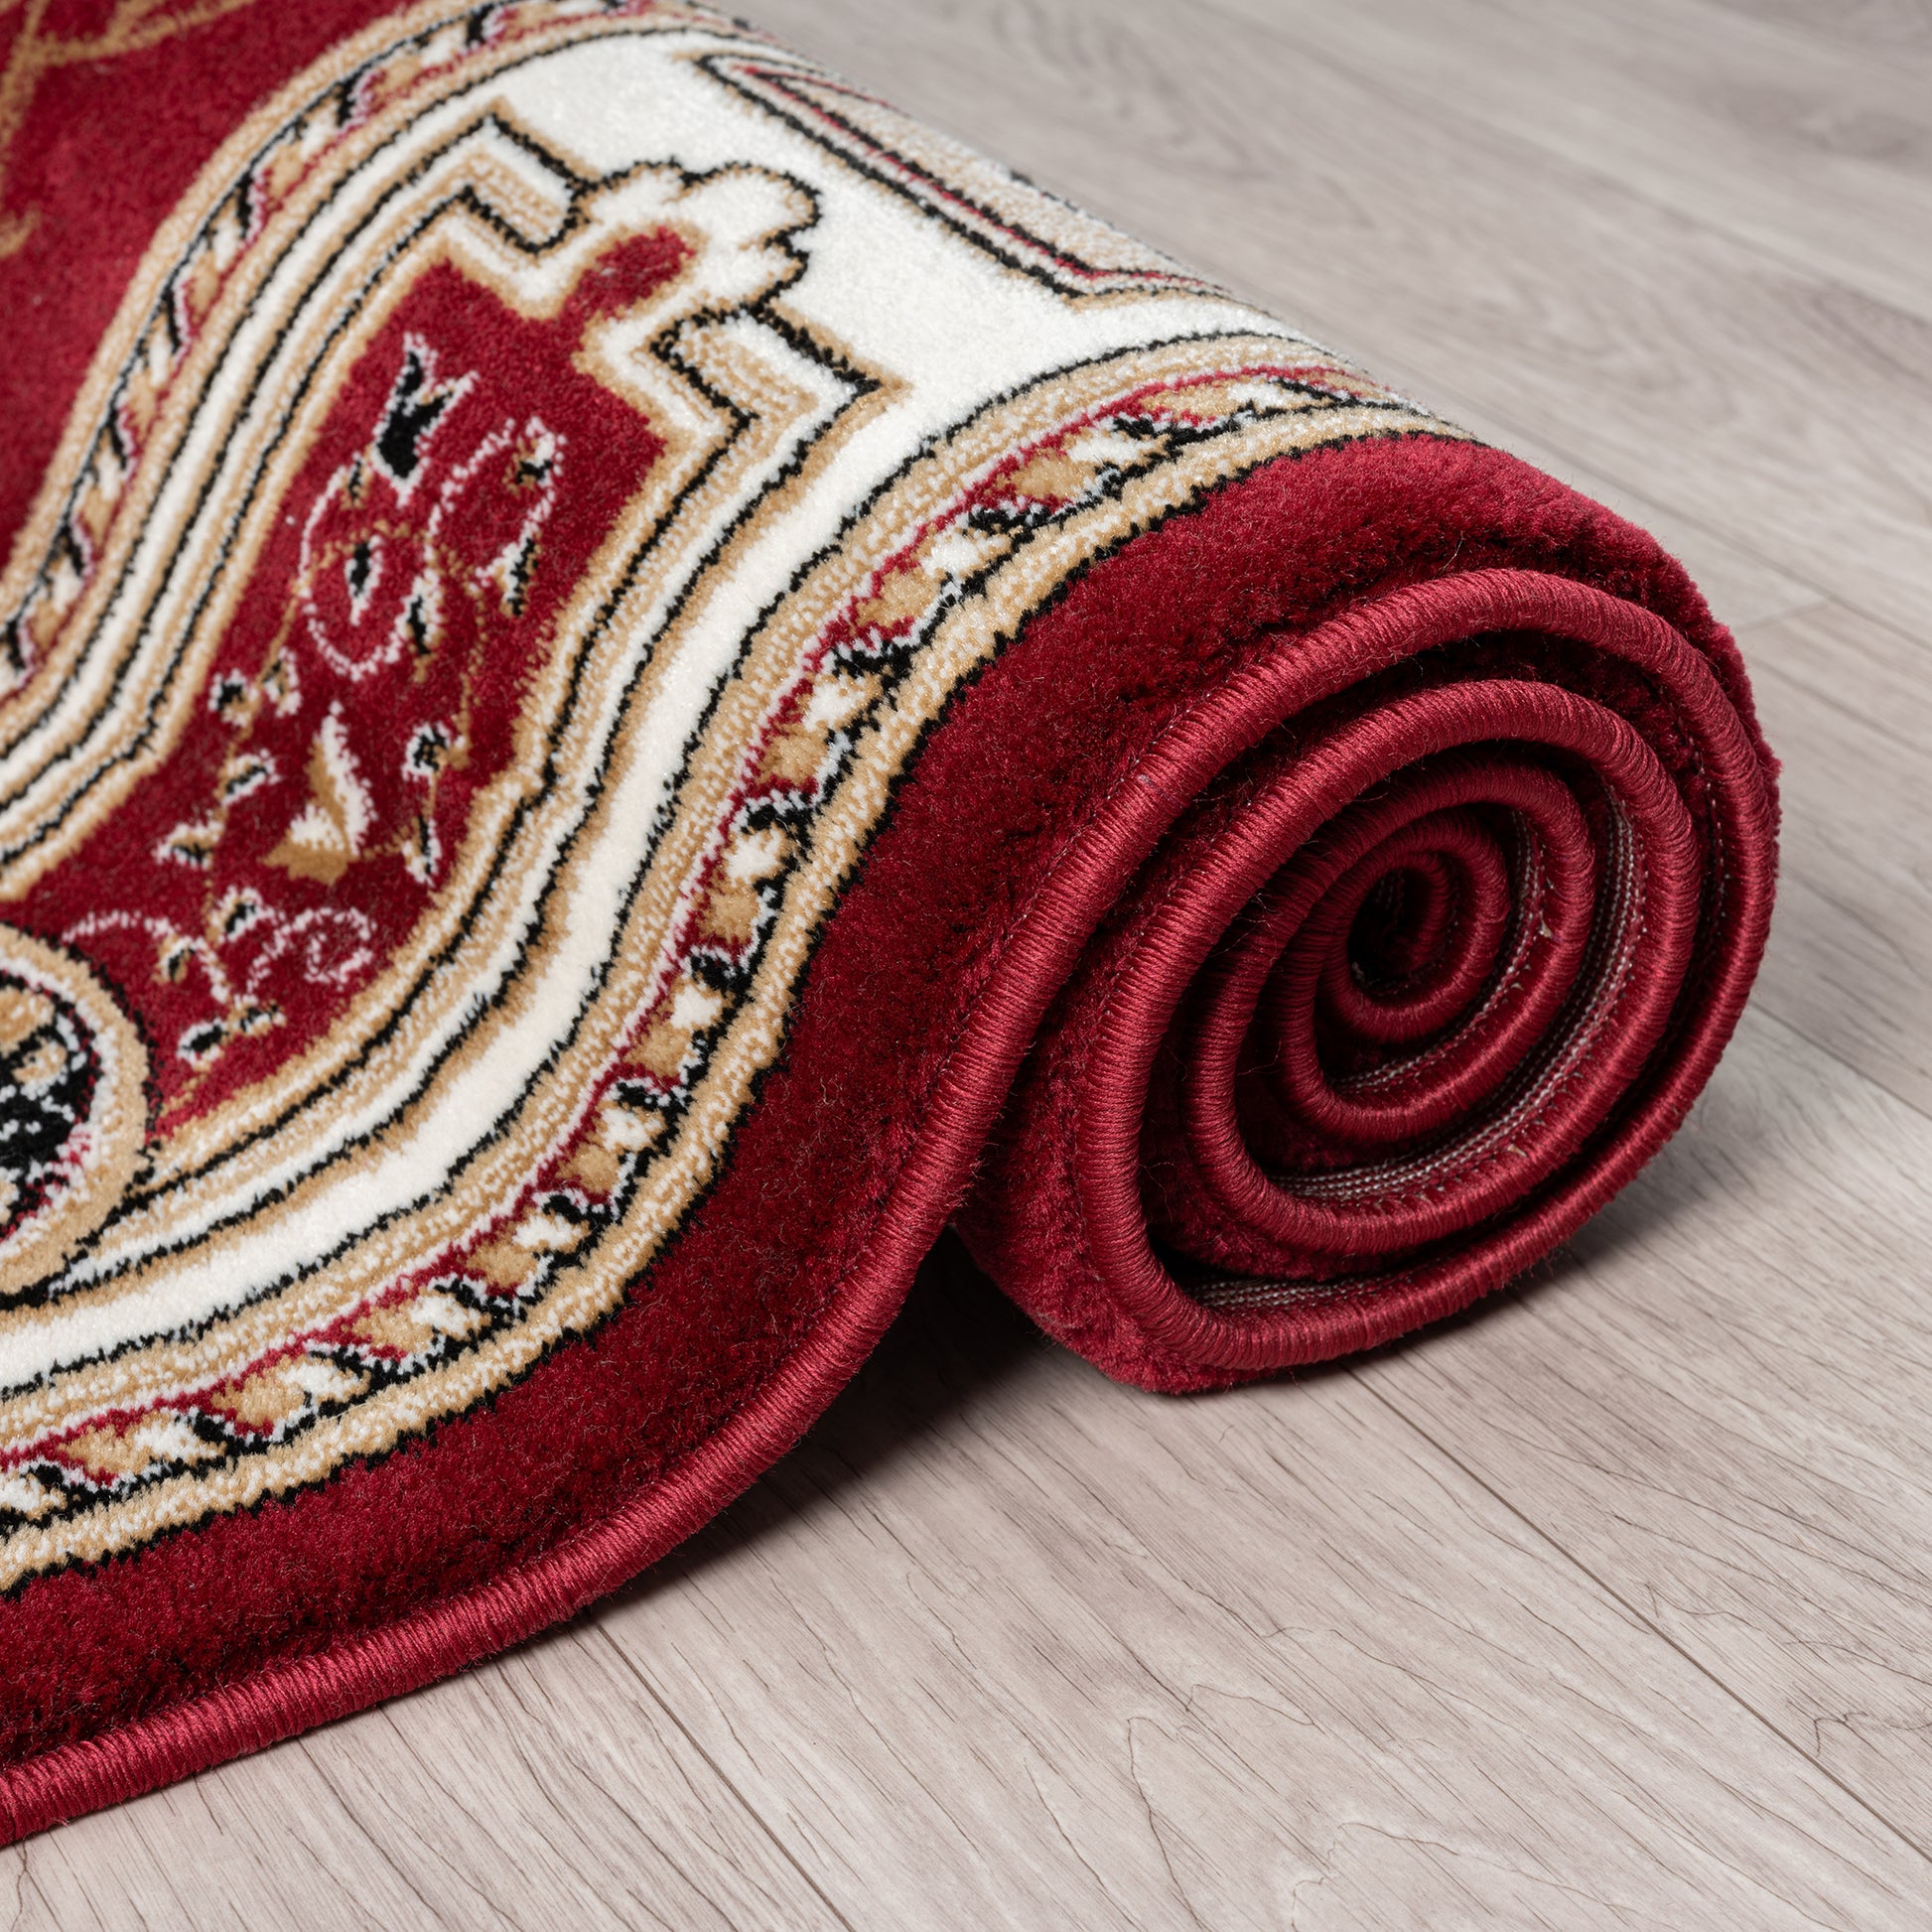 Oriental 511 Red Traditional Rug Saray Rugs